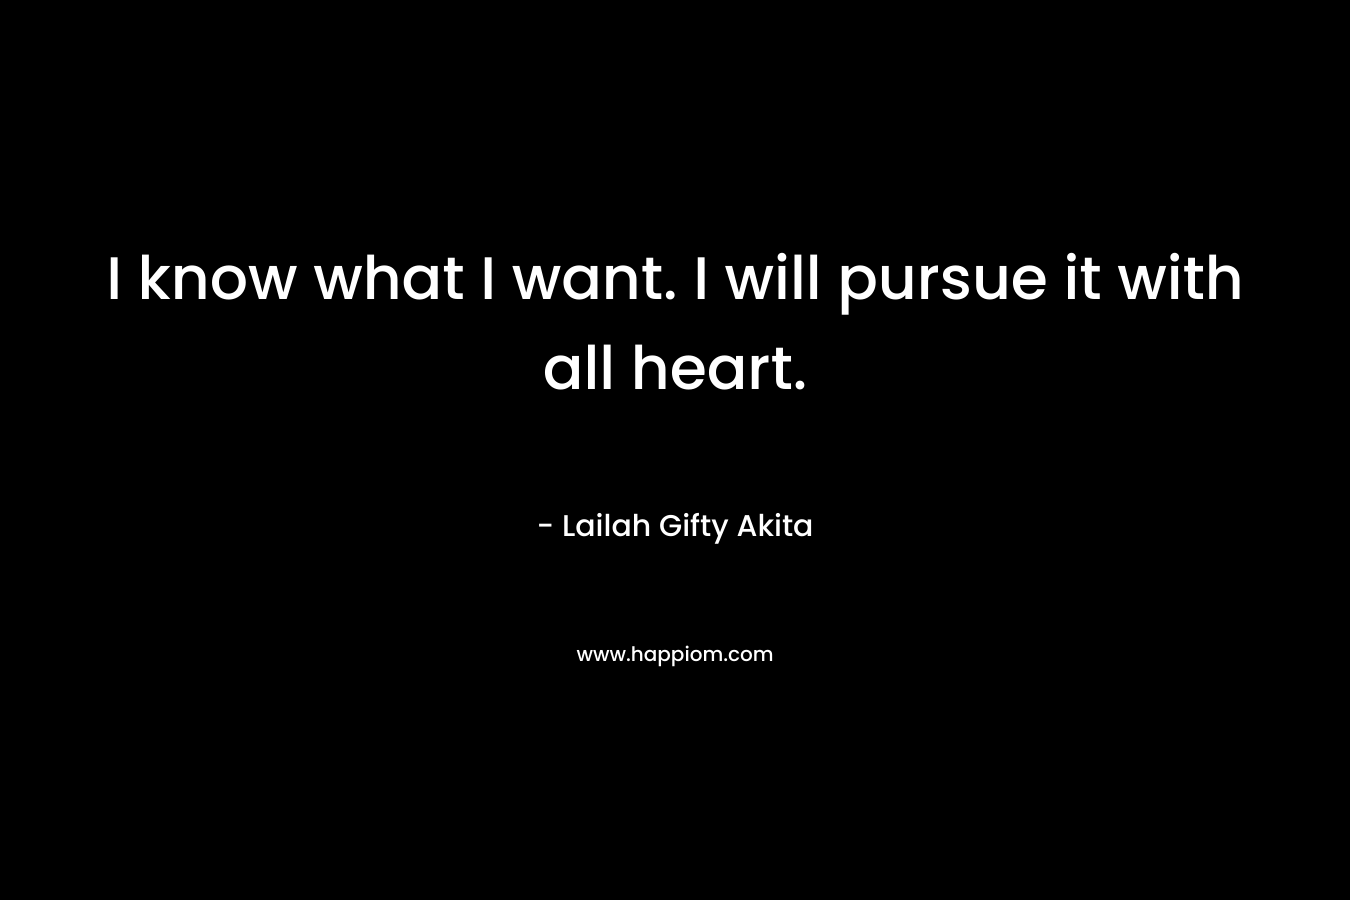 I know what I want. I will pursue it with all heart.